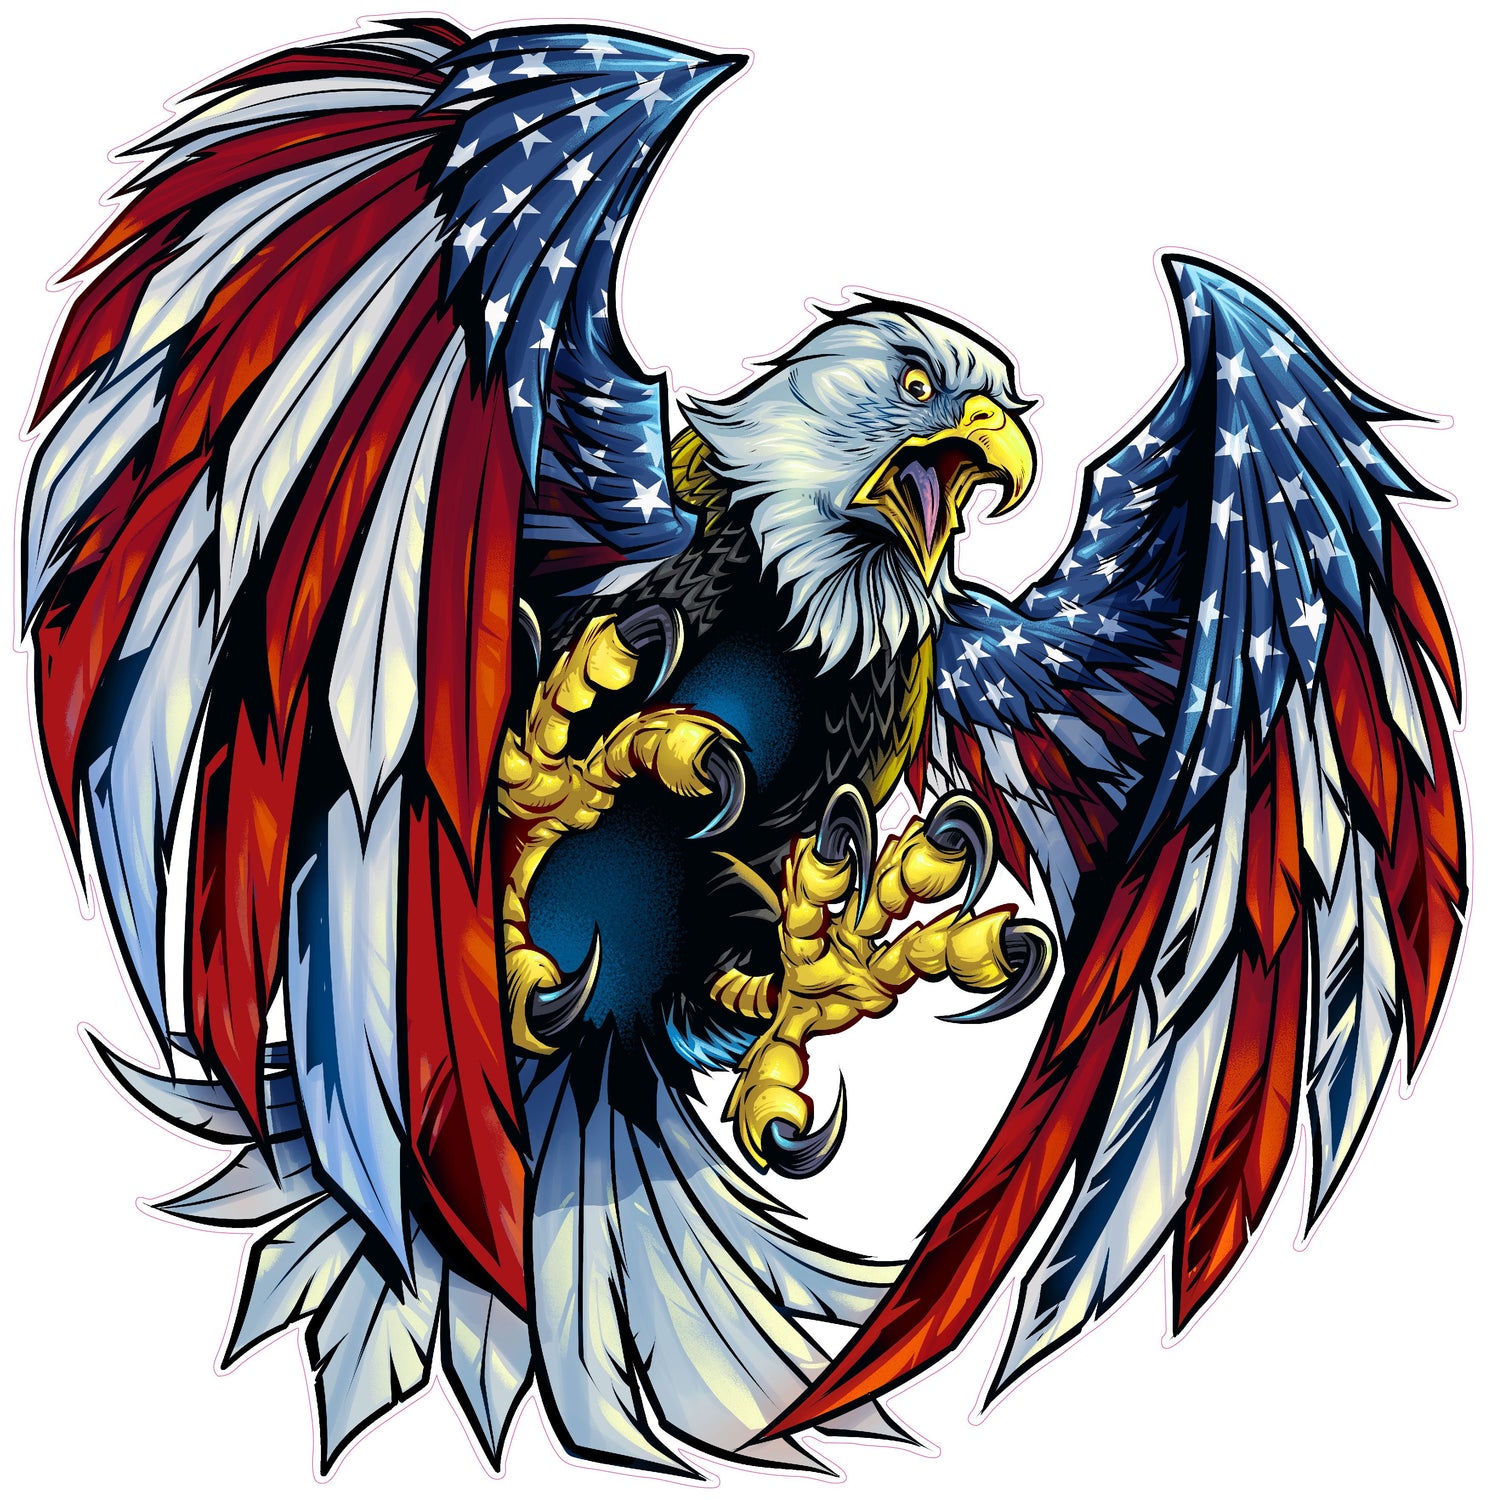 Screaming American Flag Bald Eagle Wings with UV Laminate - American Bald Eagle, American bald eagle decal, American eagle, American Eagle American Flag Decal, American flag, American flag decals, American flag eagle decals, American flag stickers, automotive decals, automotive stickers, bumper decals, bumper stickers, decals, eagle decals, eagle stickers, Military decals, military stickers, patriot eagle, Patriotic stickers, vehicle decals, Vehicle stickers, window decal, window decals, window 